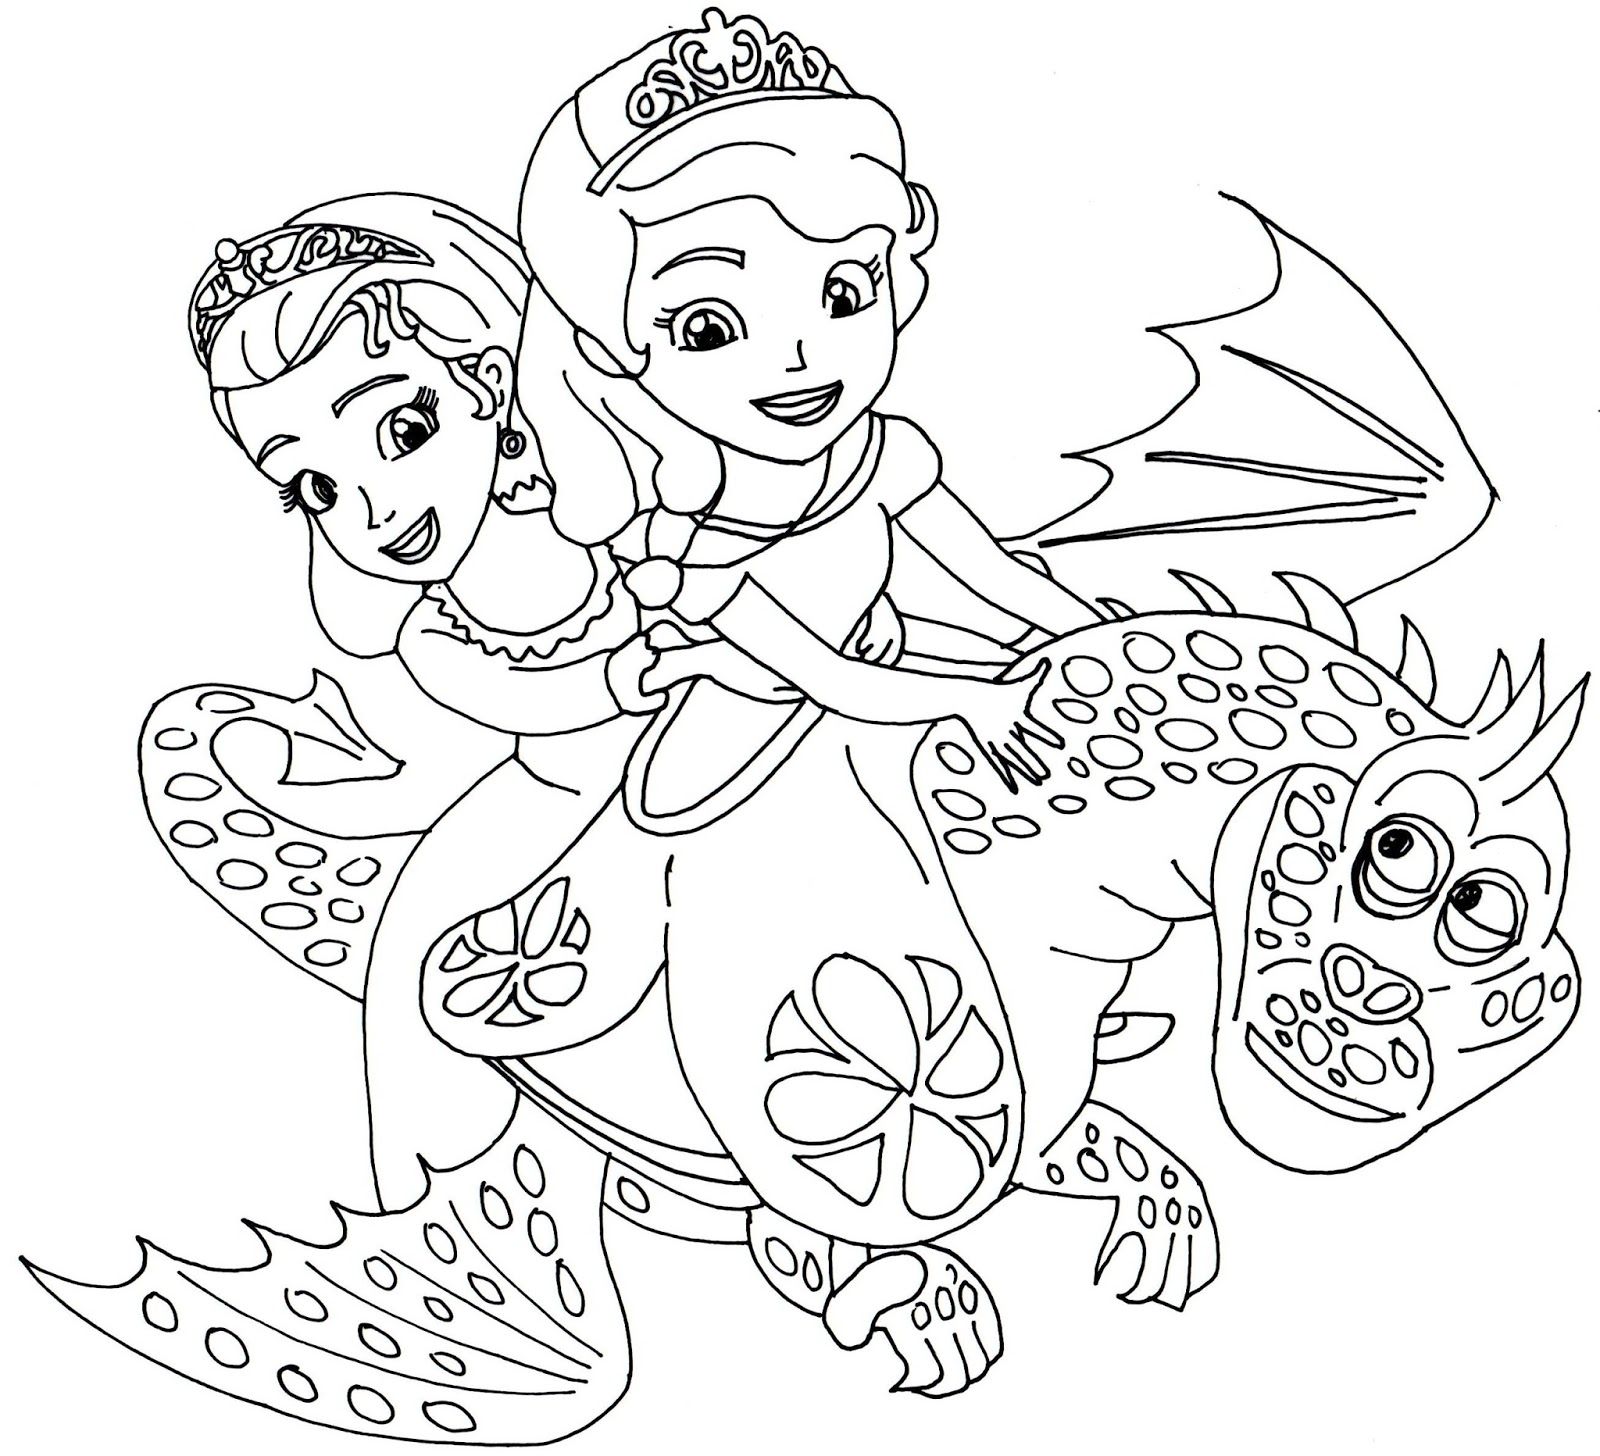 Sofia The First Coloring Pages Sofiathefirstcoloring adult